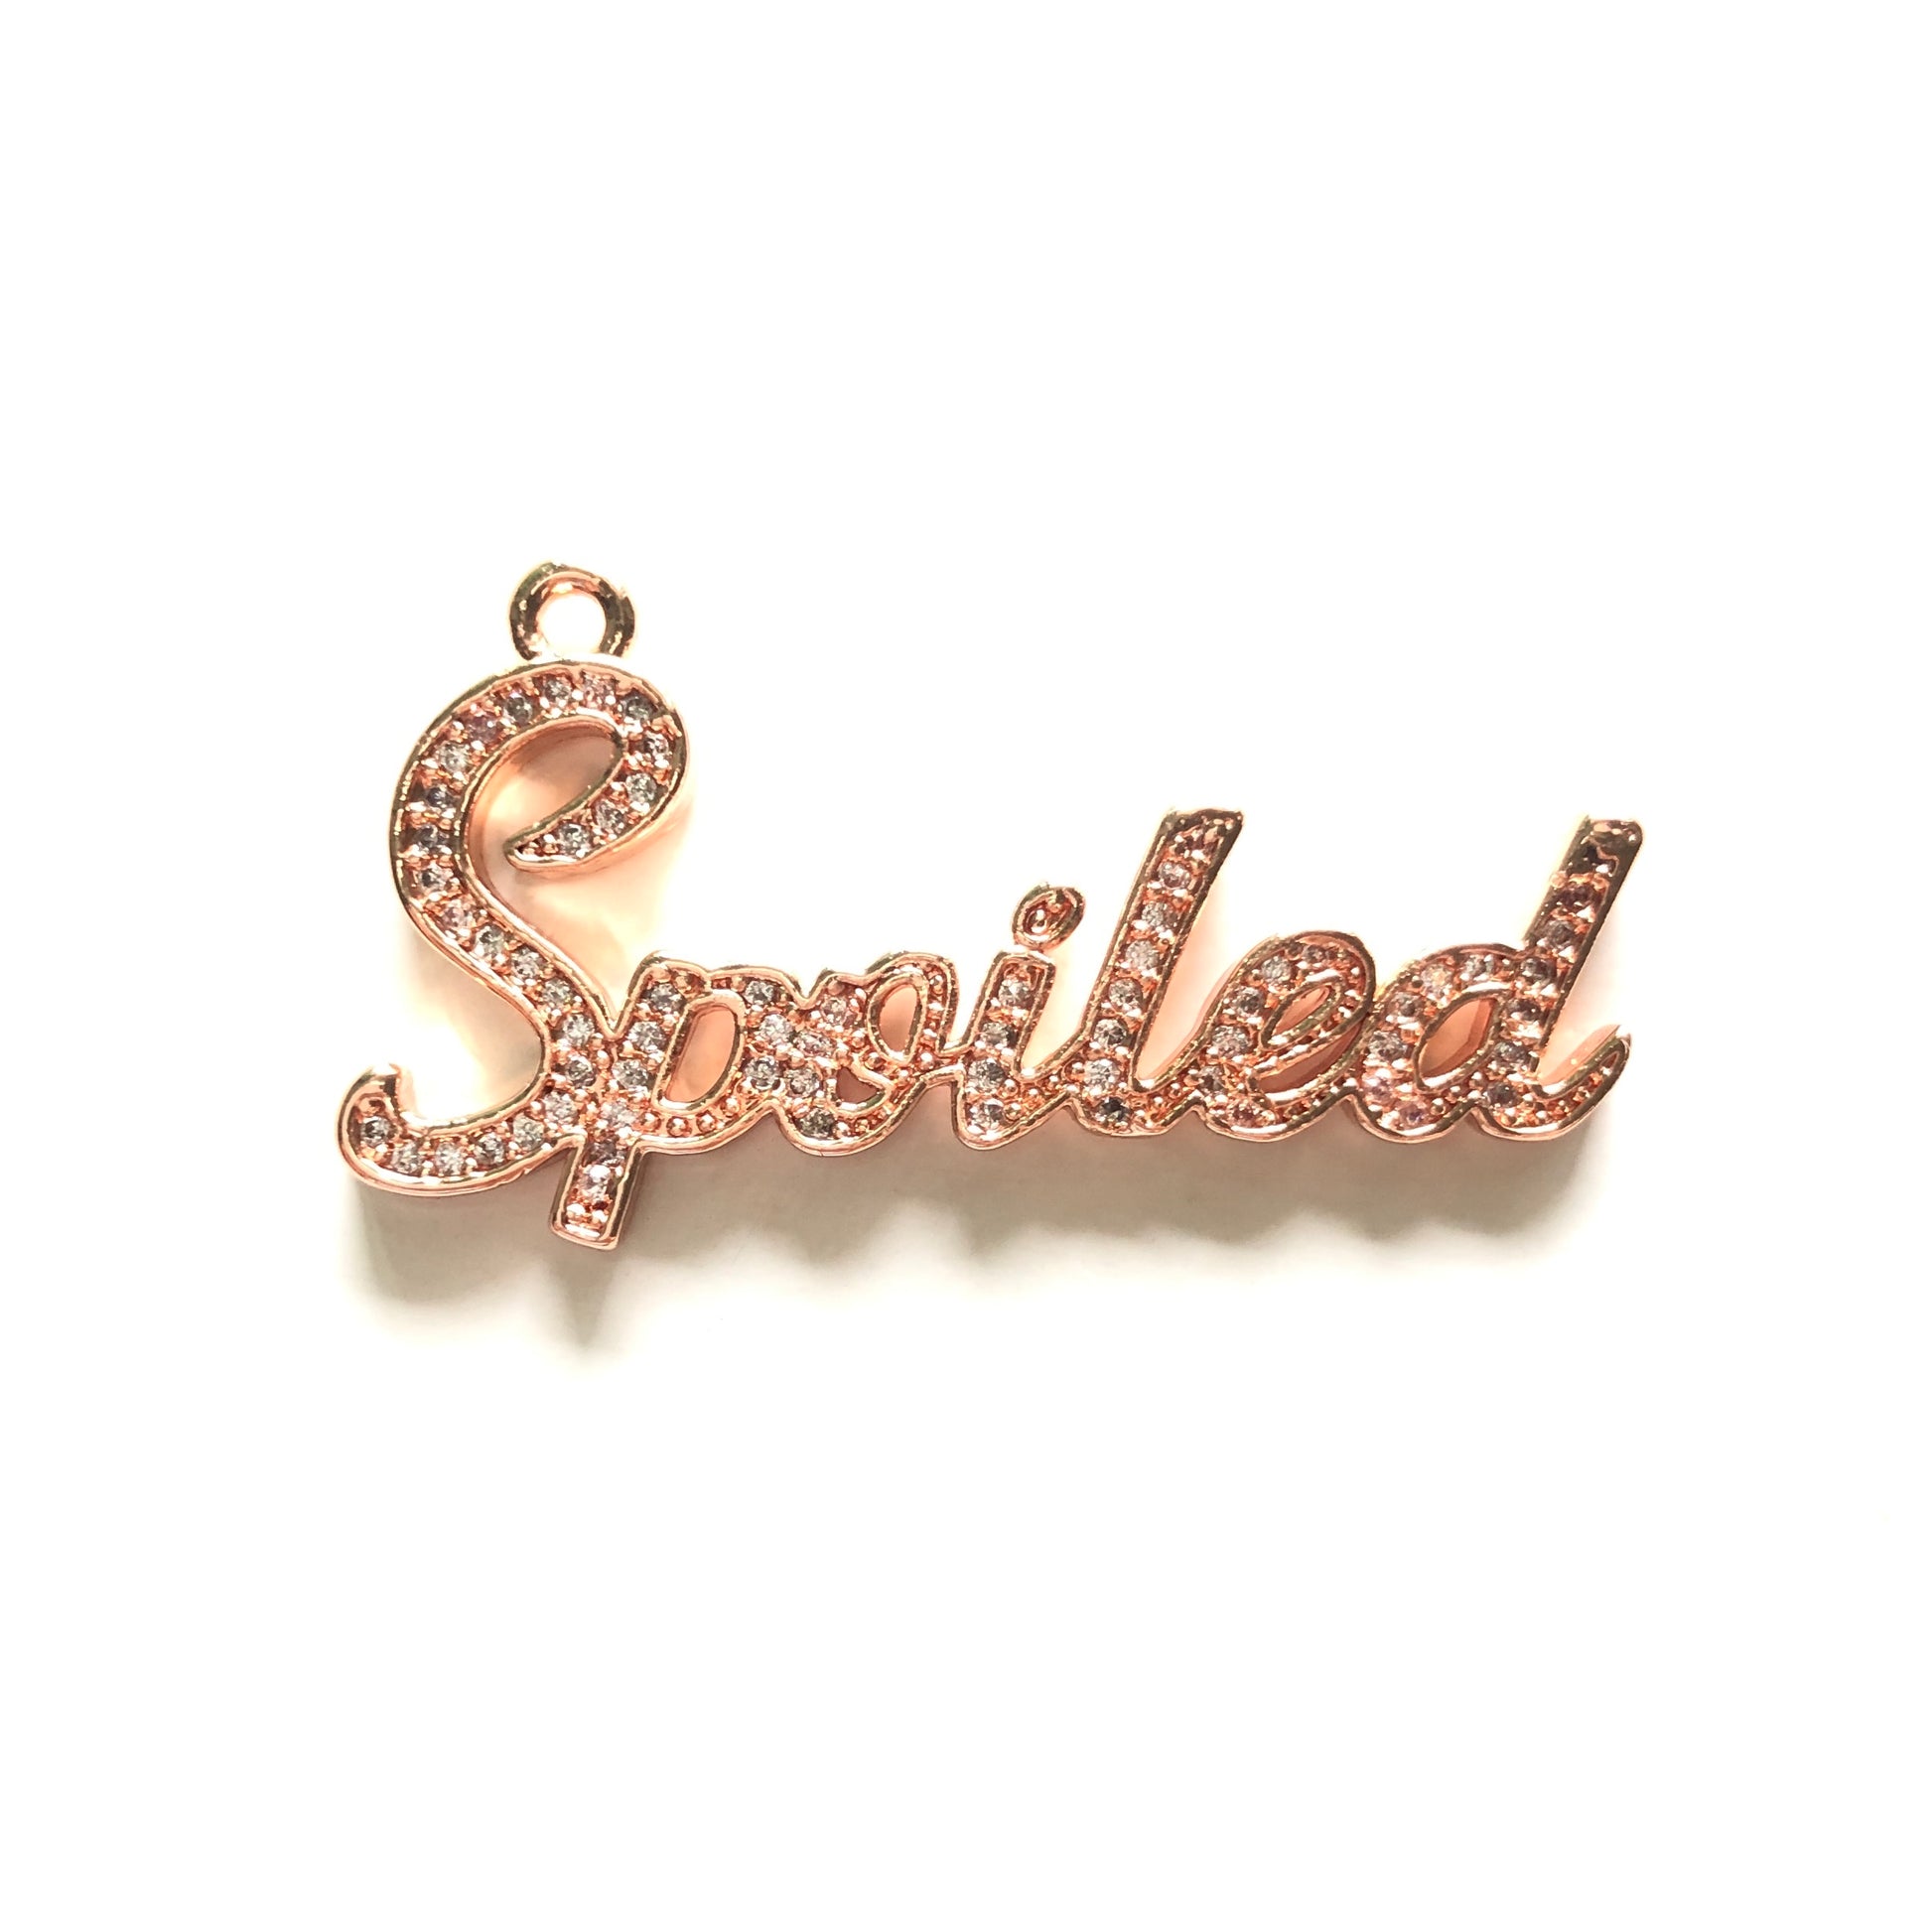 10pcs/lot 38*20.5mm CZ Paved Spoiled Charms Rose Gold CZ Paved Charms Words & Quotes Charms Beads Beyond